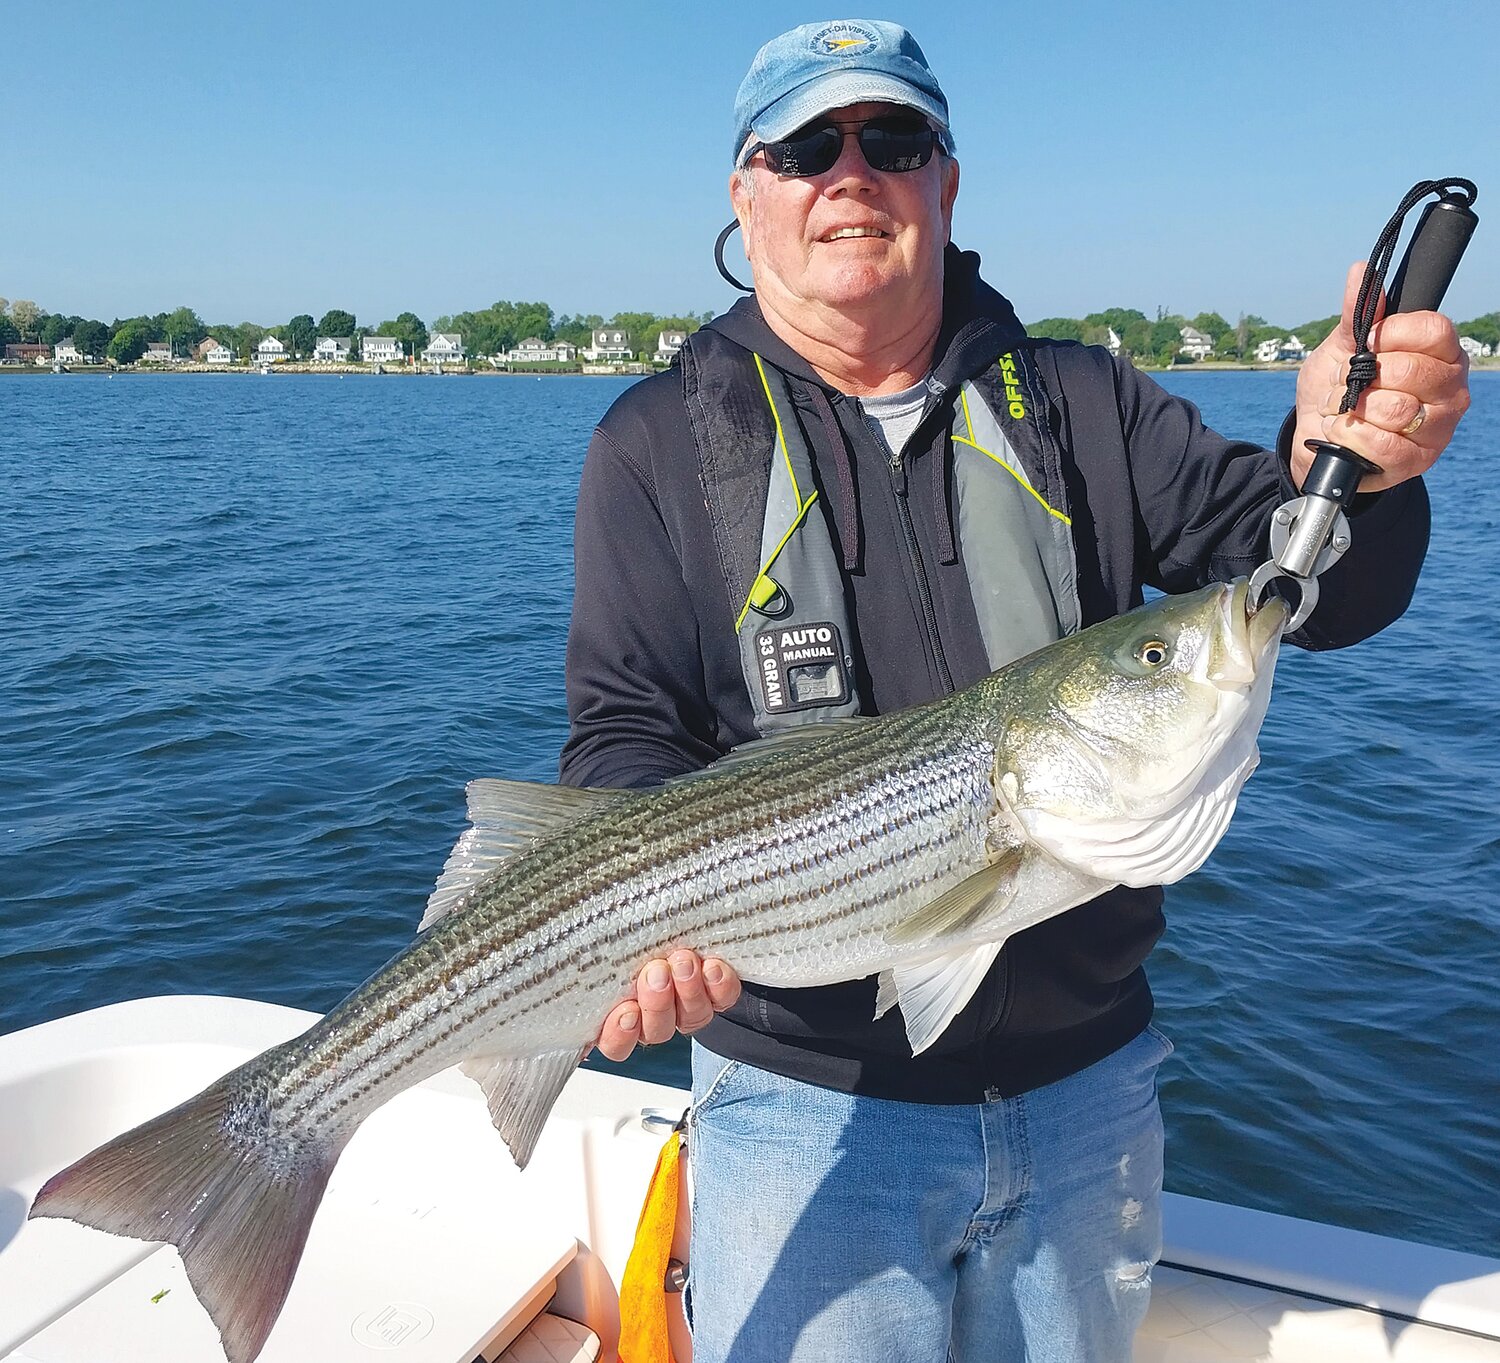 Angler Bob Donald of North Kingstown caught bass to 33” trolling tube & worm north of Conimicut Light. An influx of pogies enhanced the striper bite last week.